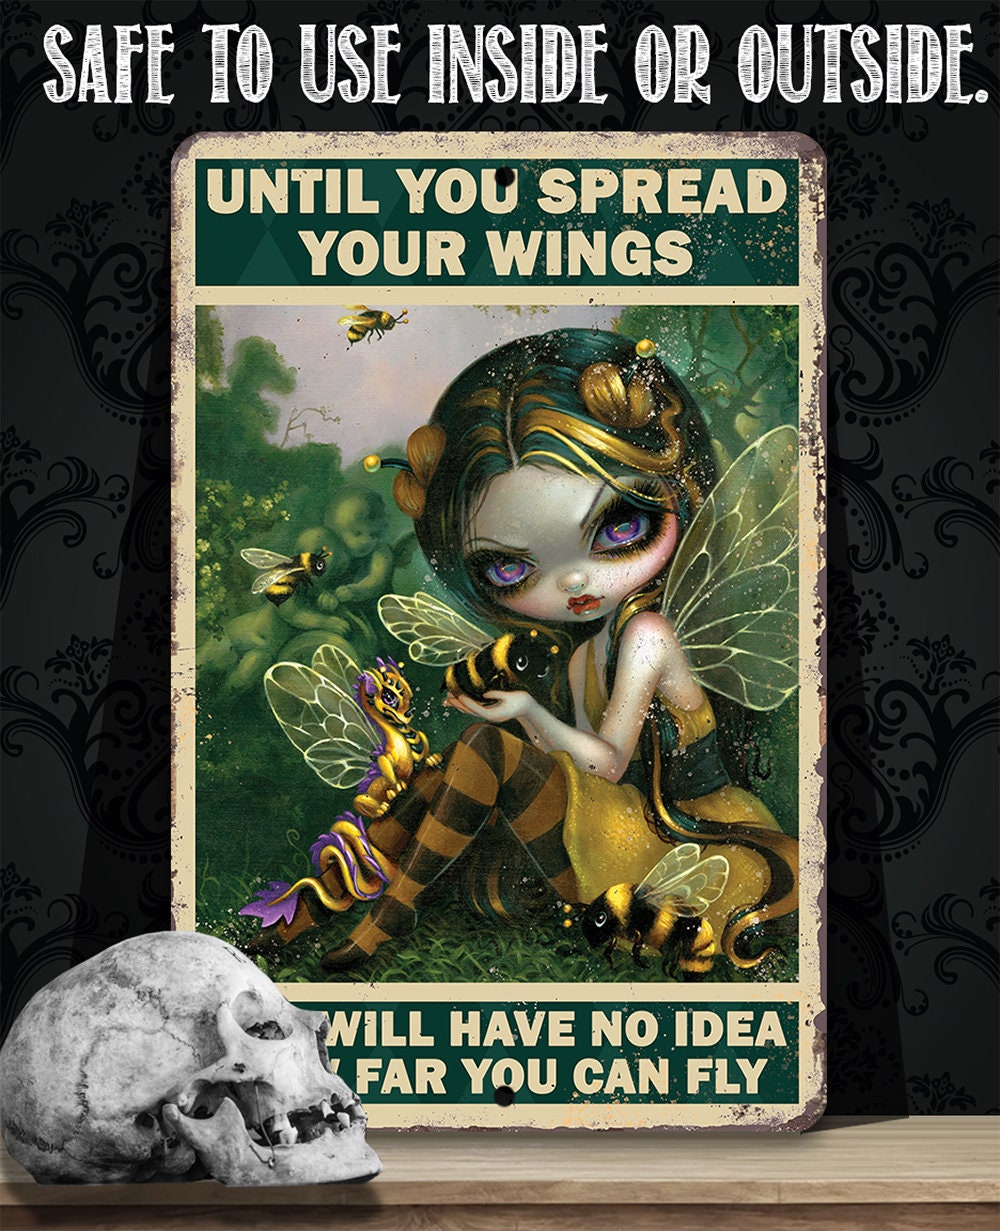 Until You Spread Your Wings - 8" x 12" or 12" x 18" Aluminum Tin Awesome Gothic Metal Poster Lone Star Art 